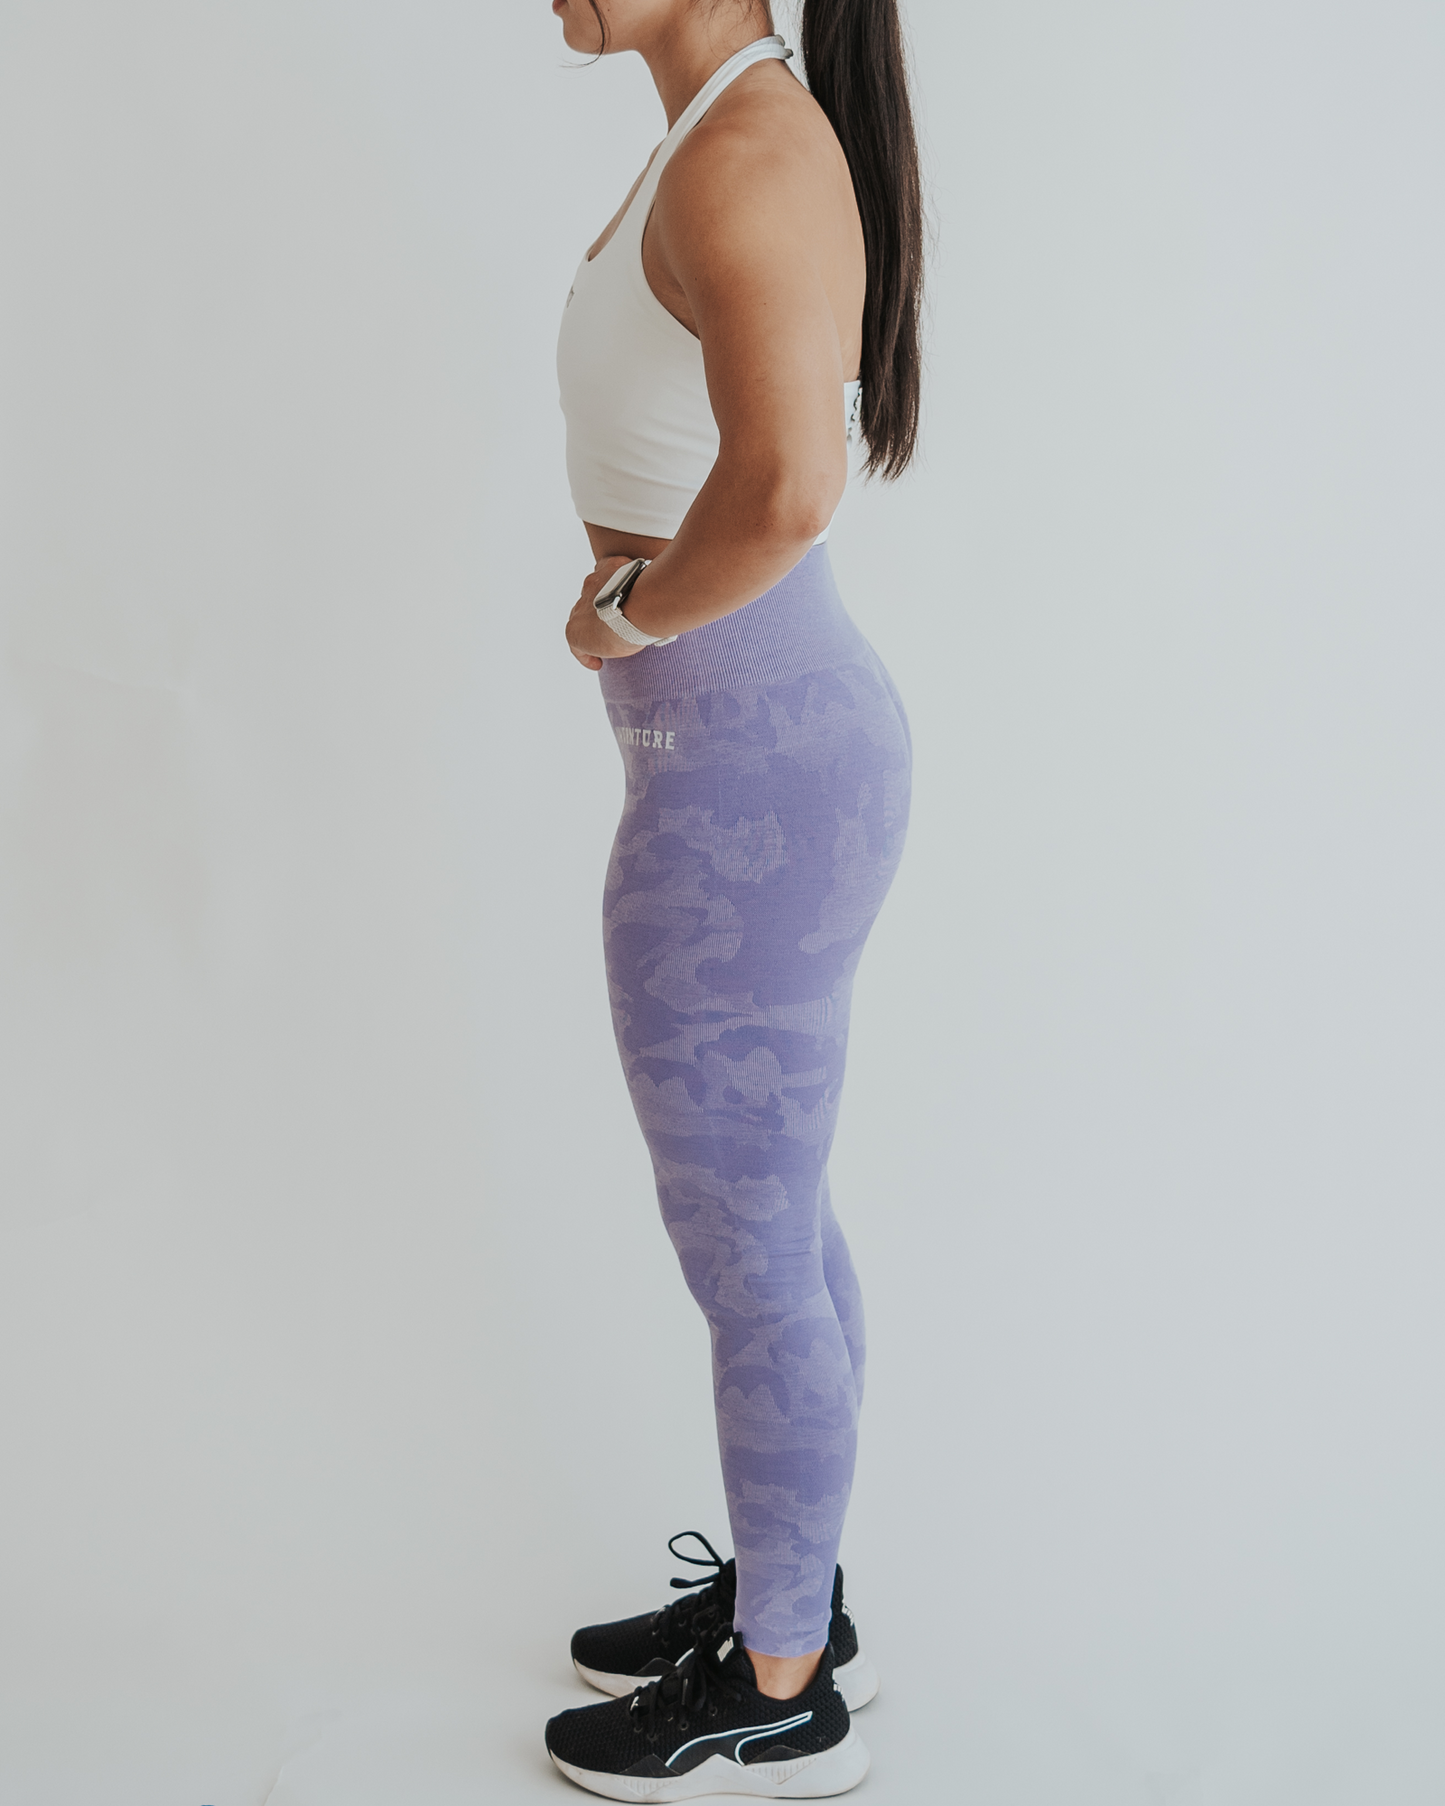 Operation American Apparel Camouflage Leggings (Small/Med, Sand Storm) at   Women's Clothing store